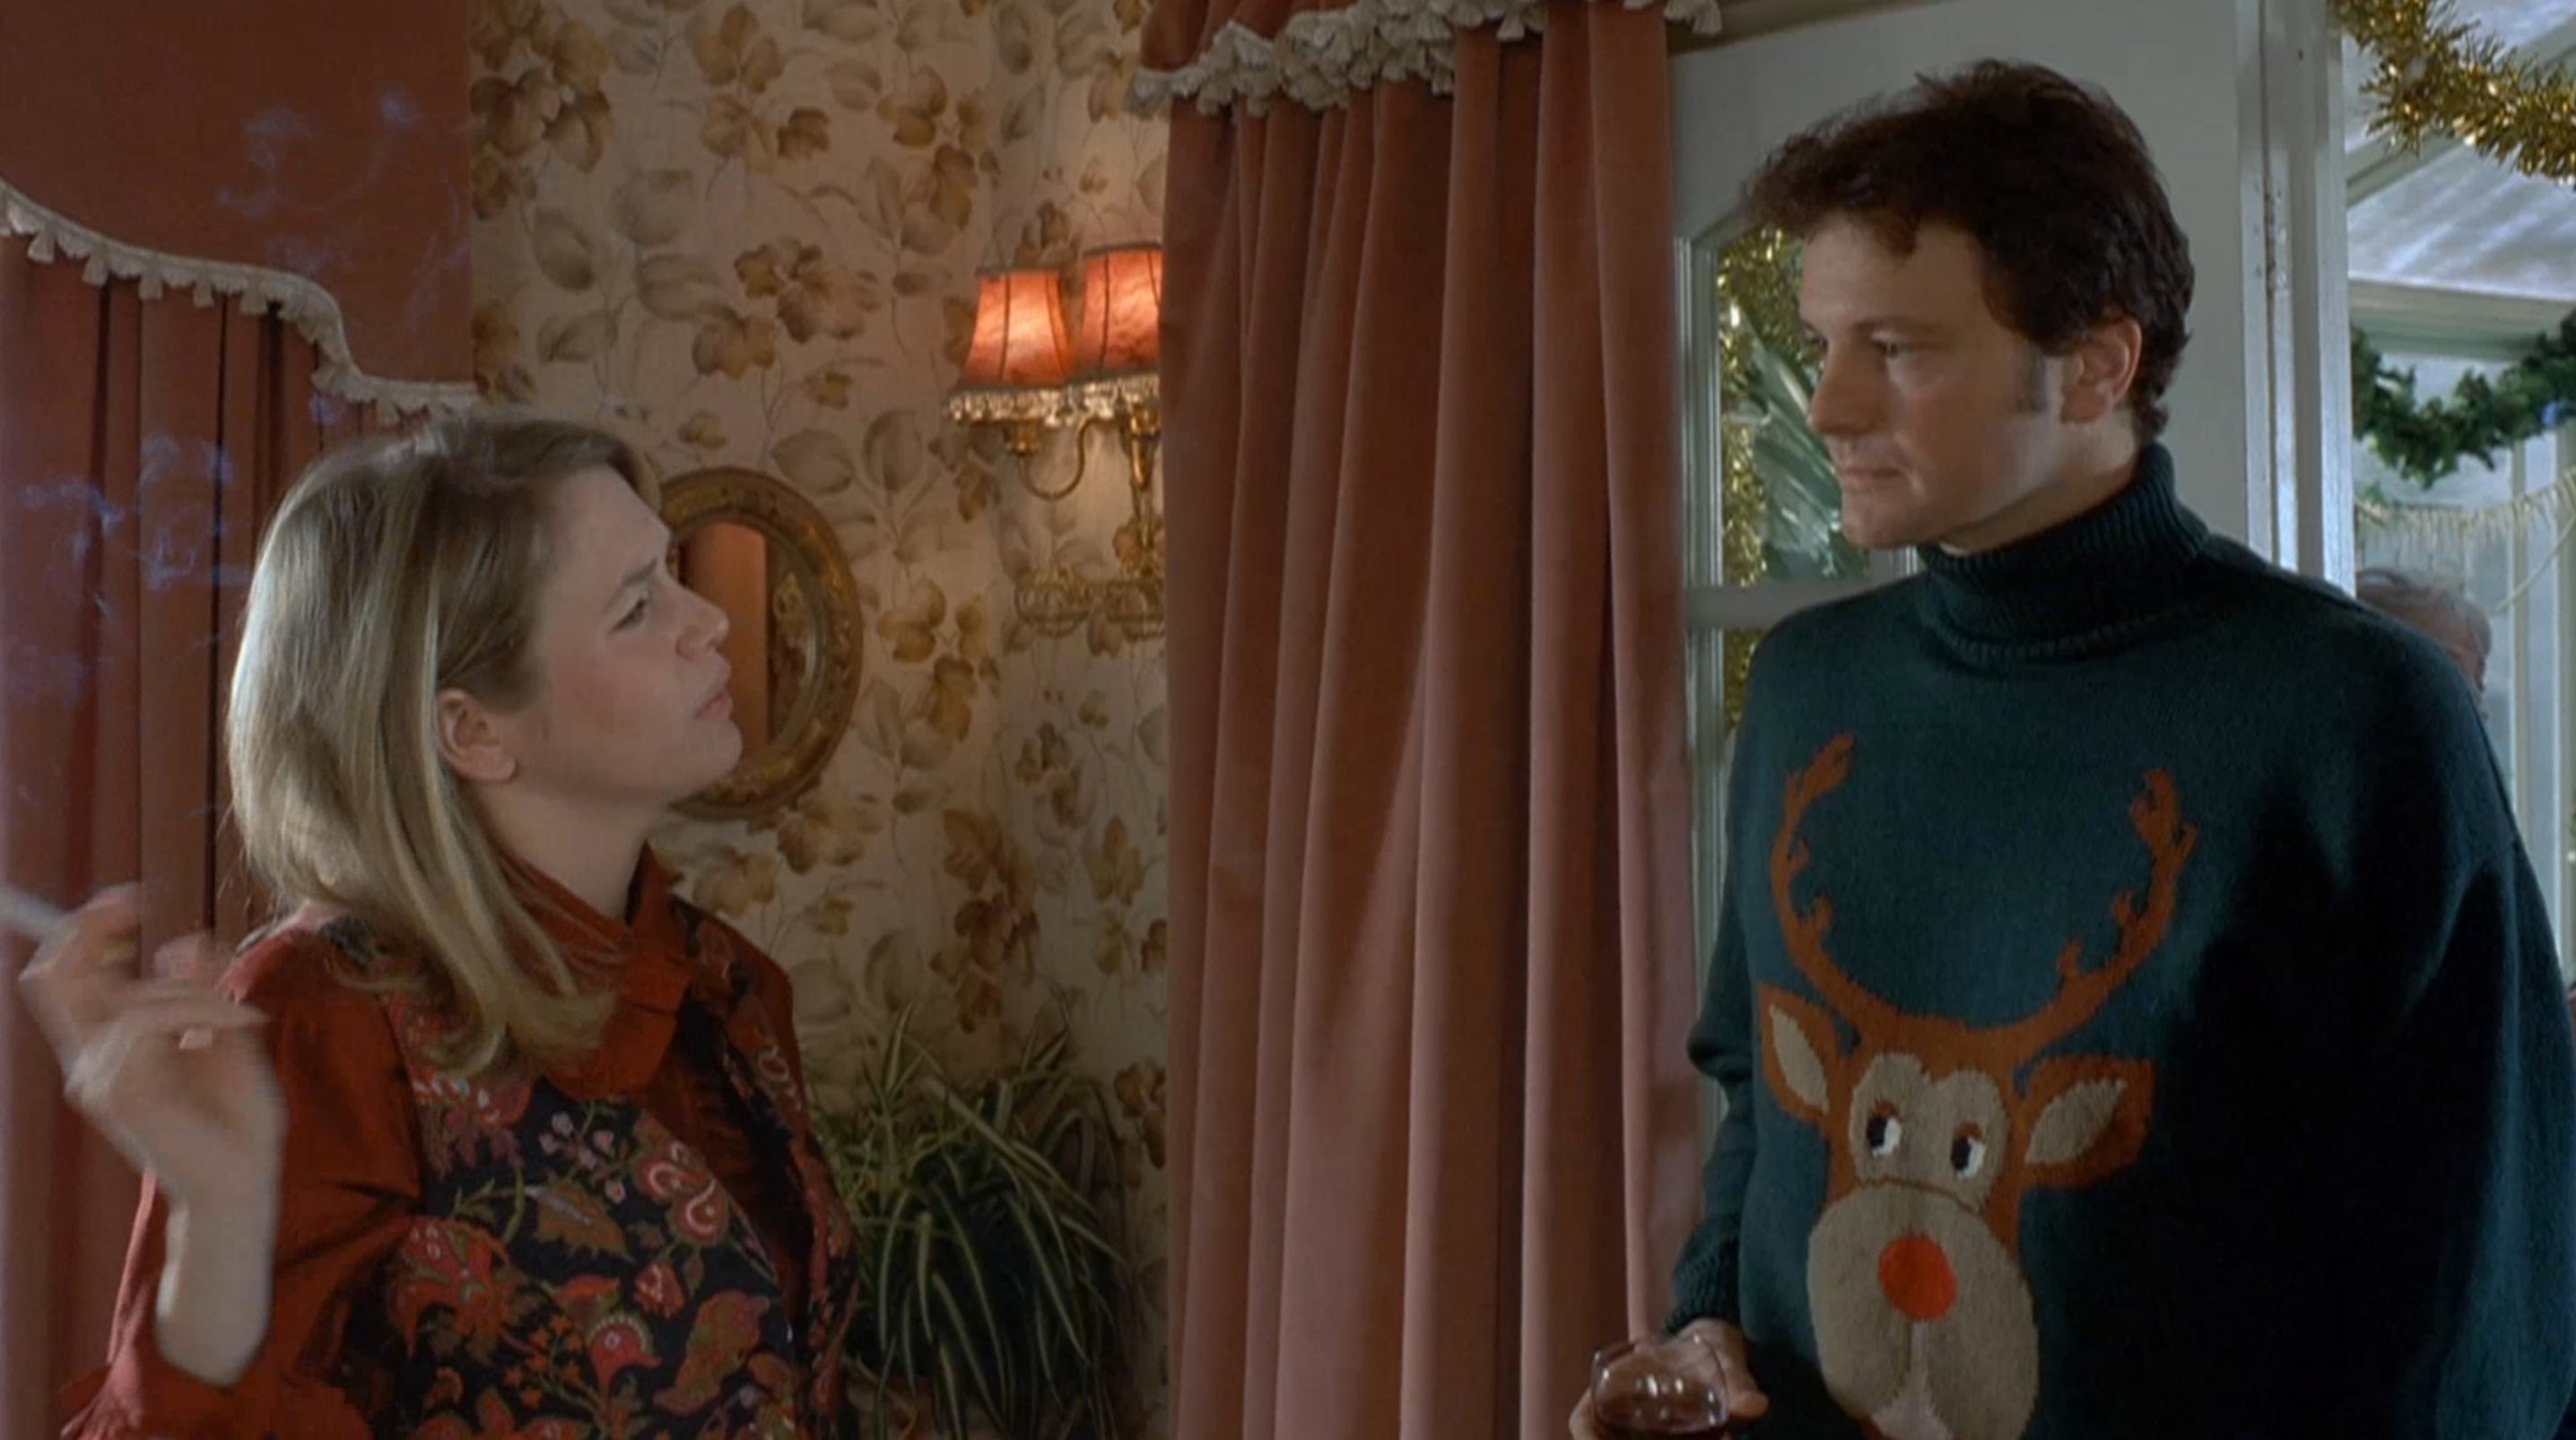 Mark Darcy movies, Book recommendation, The ugly sweater boom, Quirky read, 2880x1610 HD Desktop